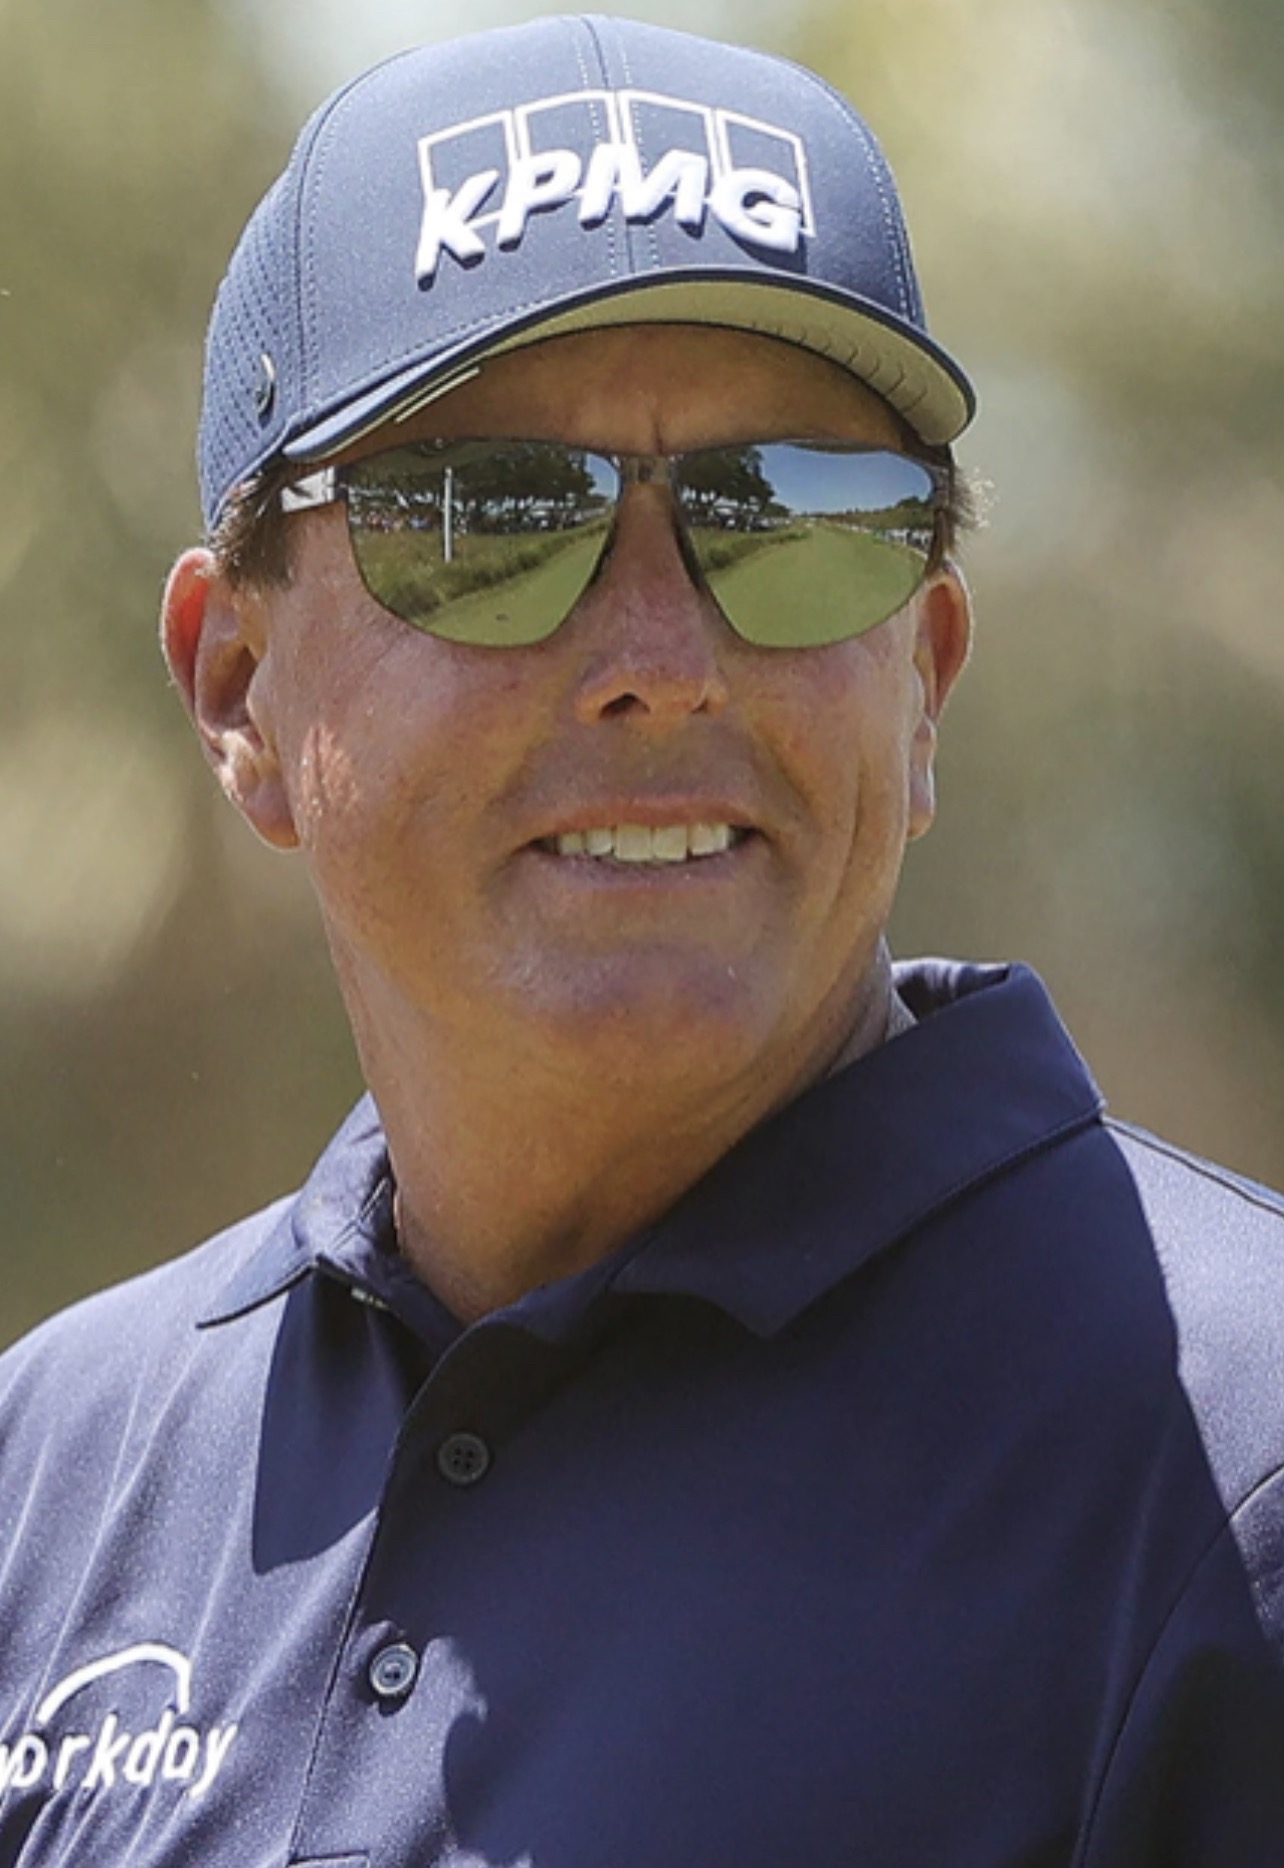 What Kind of Sunglasses Does Phil Mickelson Wear?